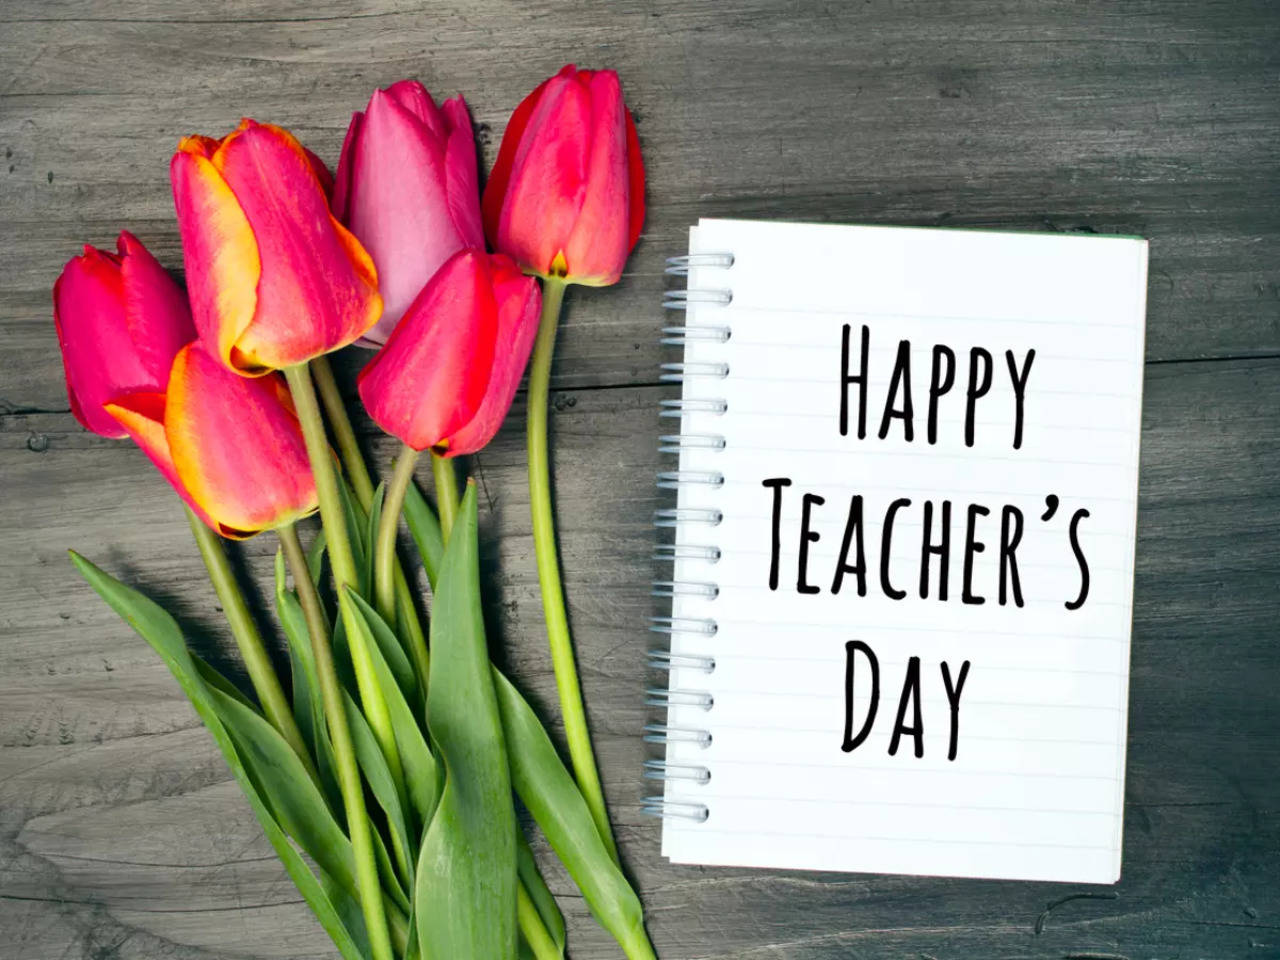 Teachers Day Greeting Card Ideas, Images, Wishes, Messages: 3 ways ...